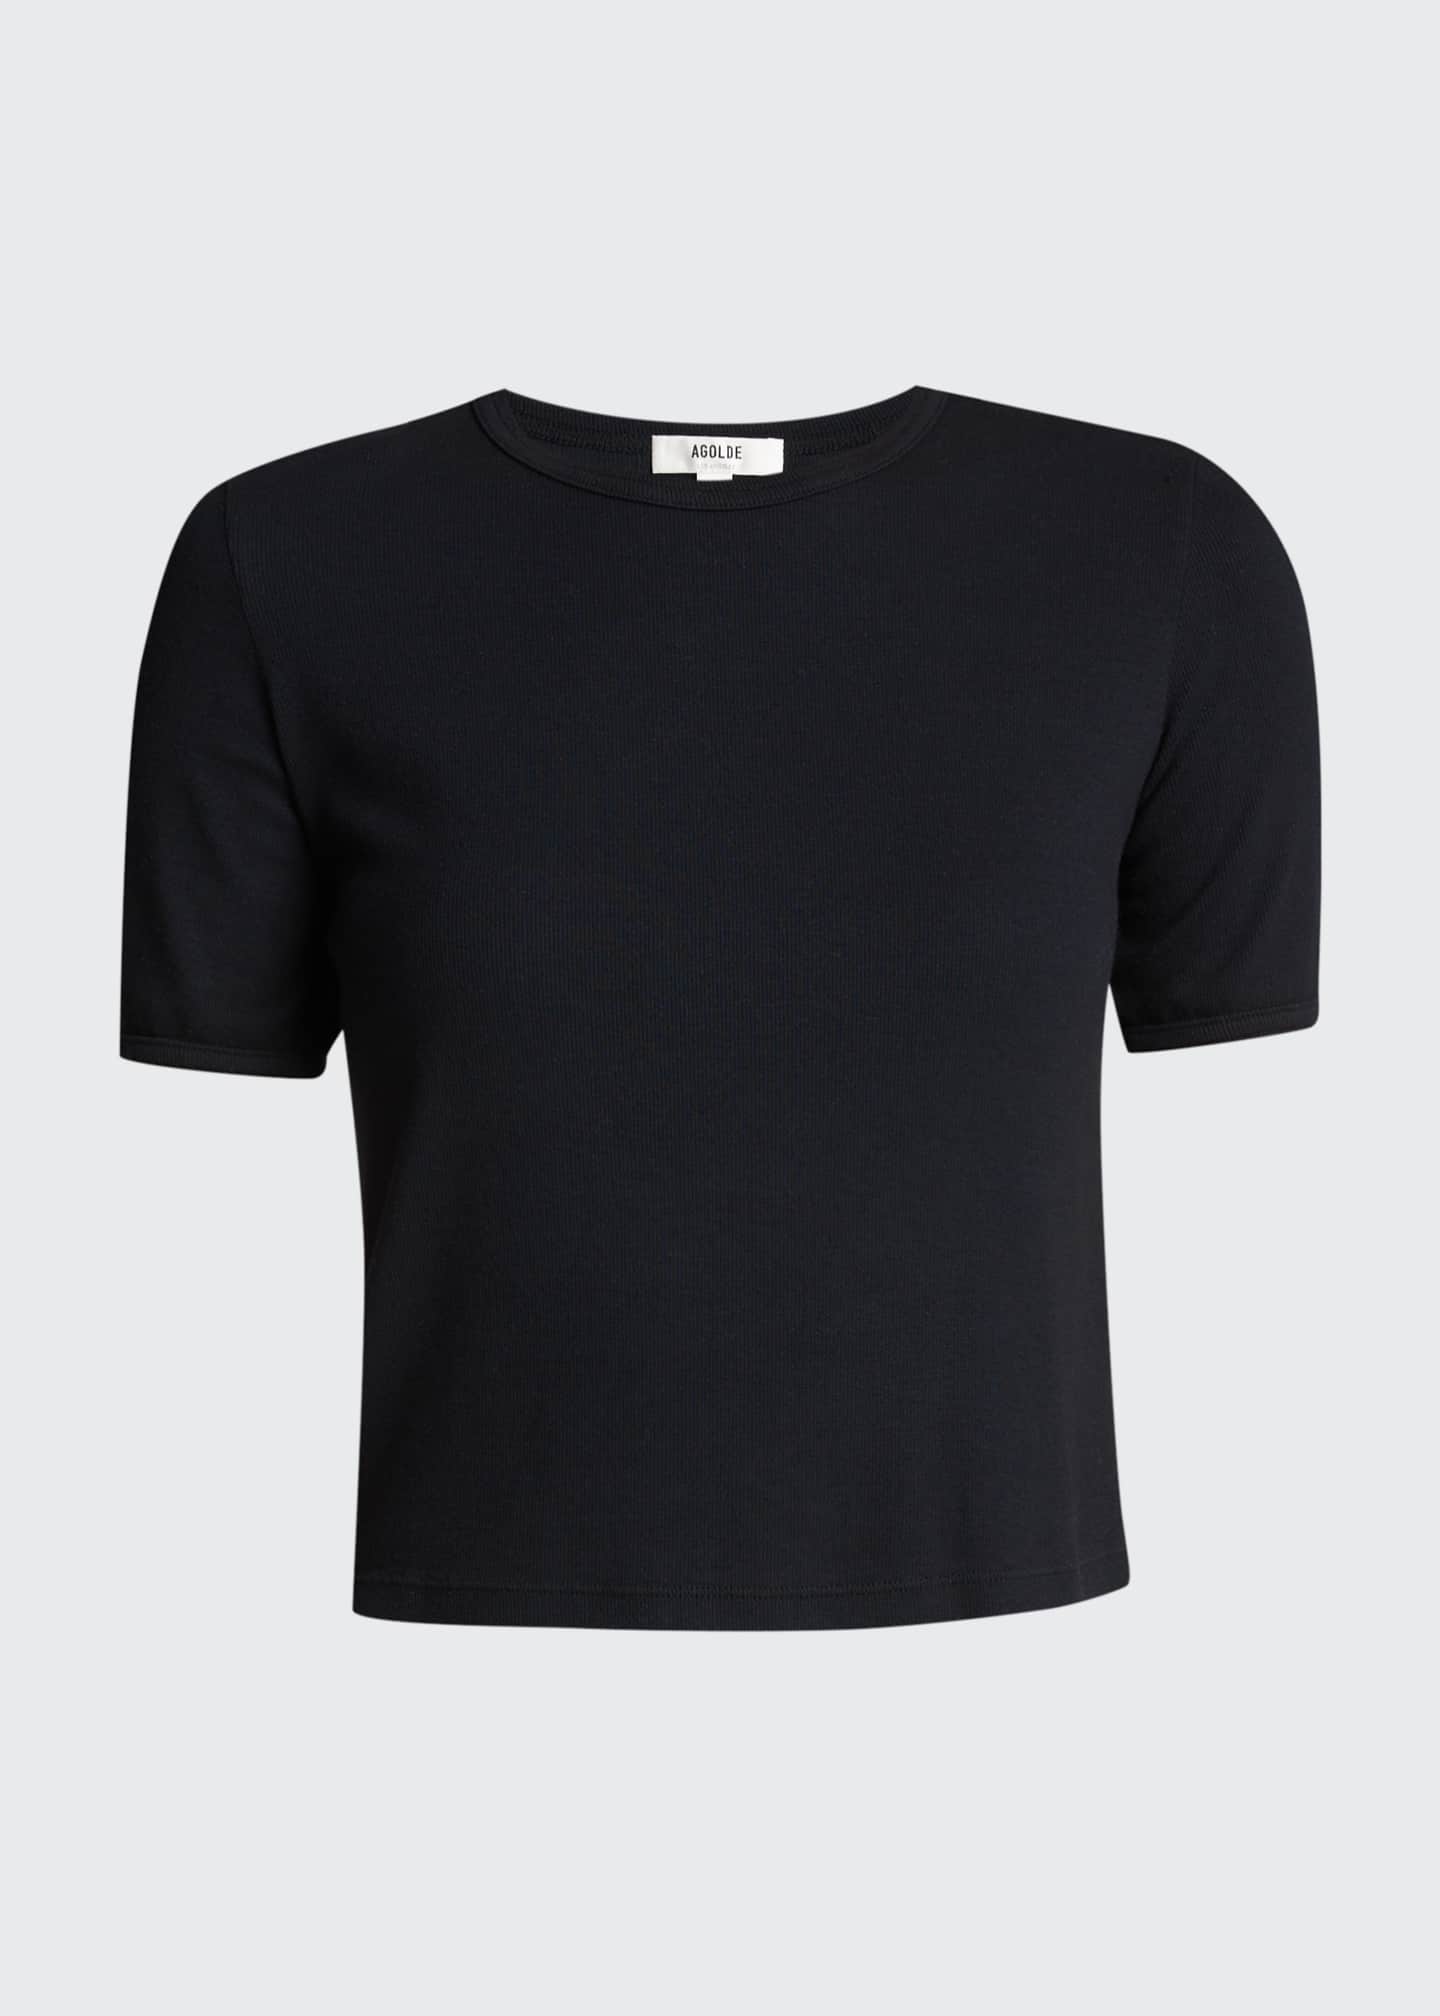 AGOLDE Relaxed Ribbed Tee - Bergdorf Goodman